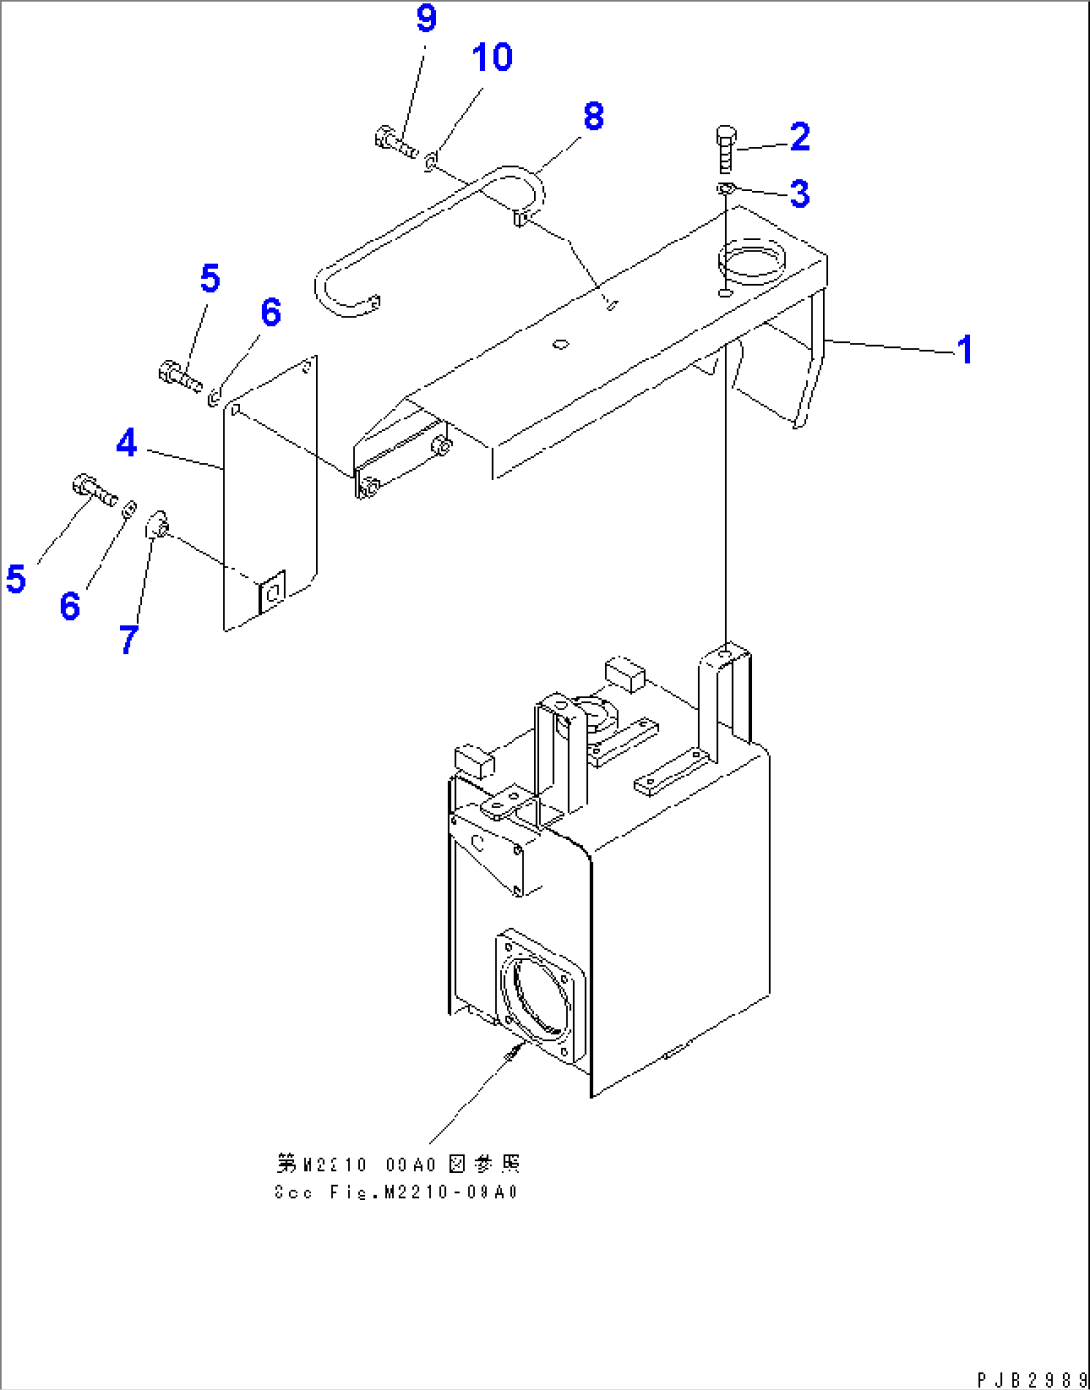 COUNTER WEIGHT TANK RELATED PARTS